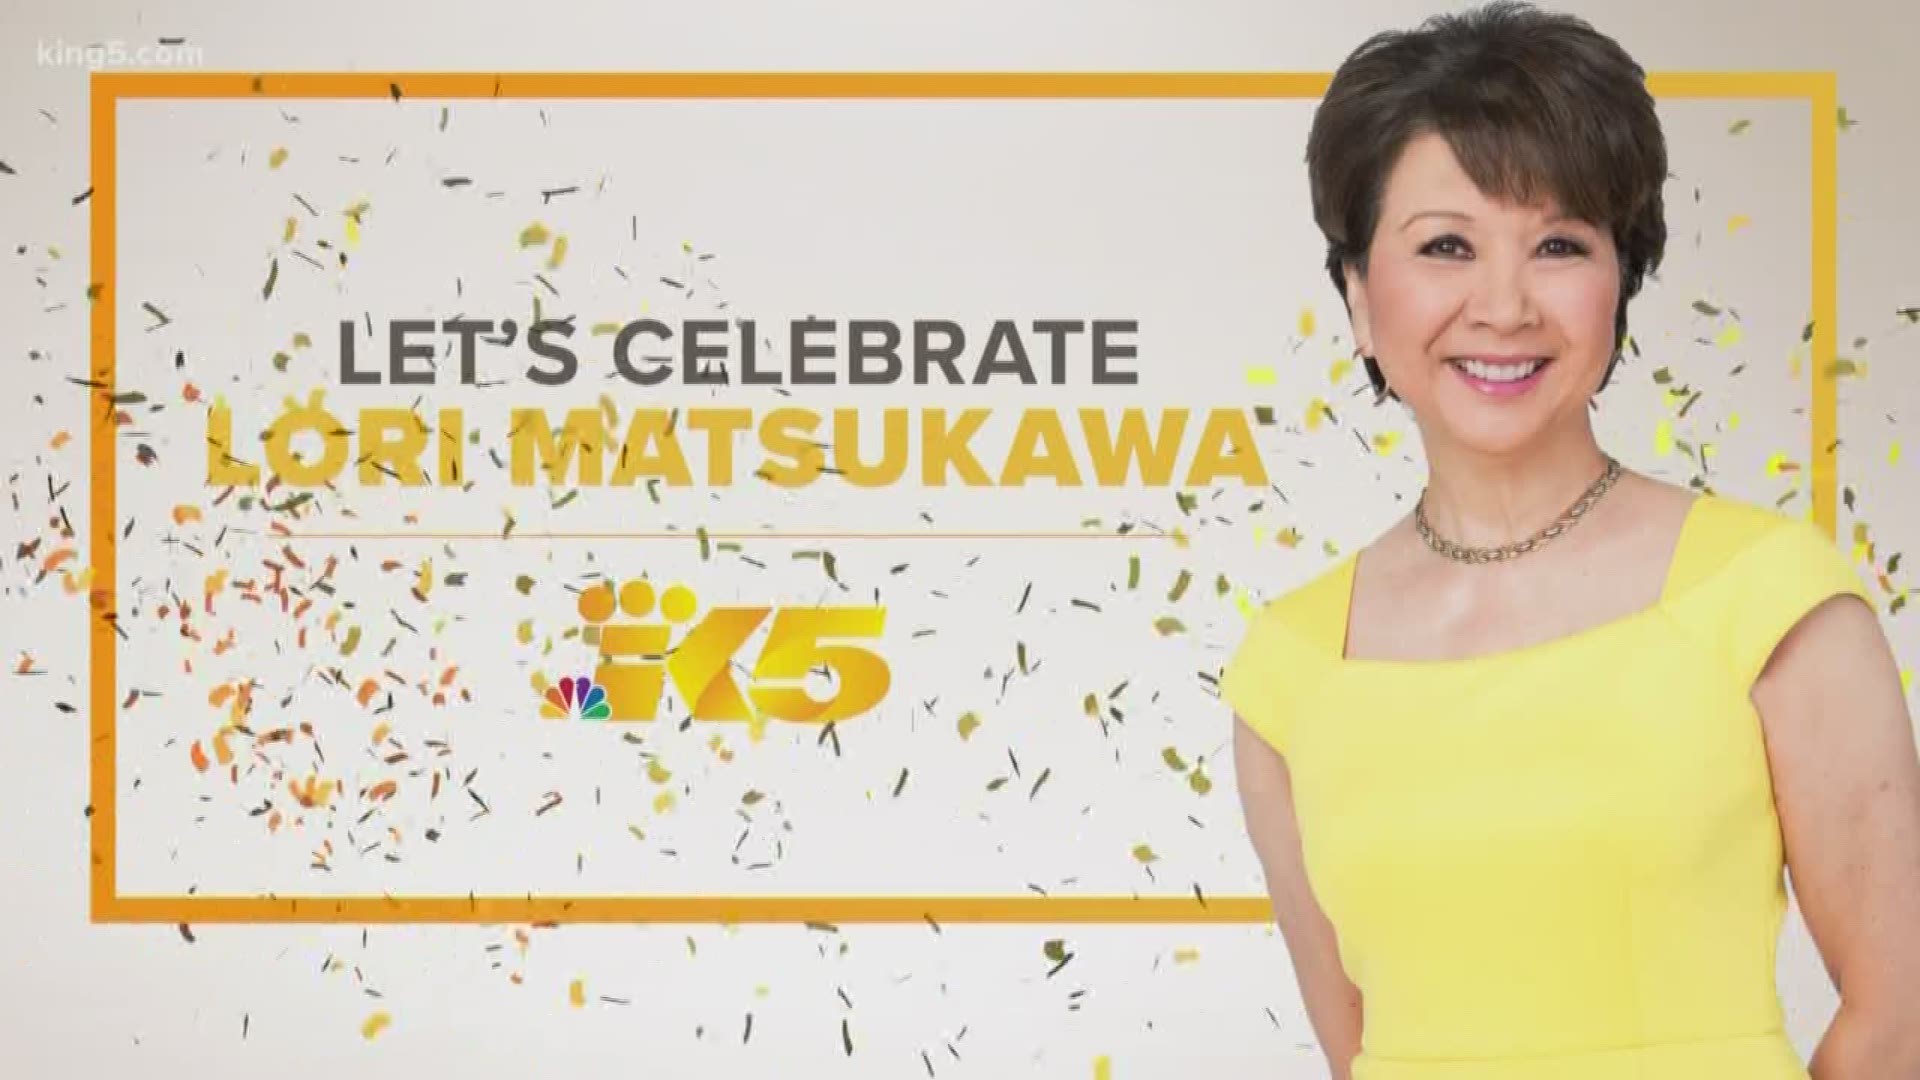 KING 5 anchor Lori Matsukawa is retiring after 36 years. Here's a look back at some of her career accomplishments.